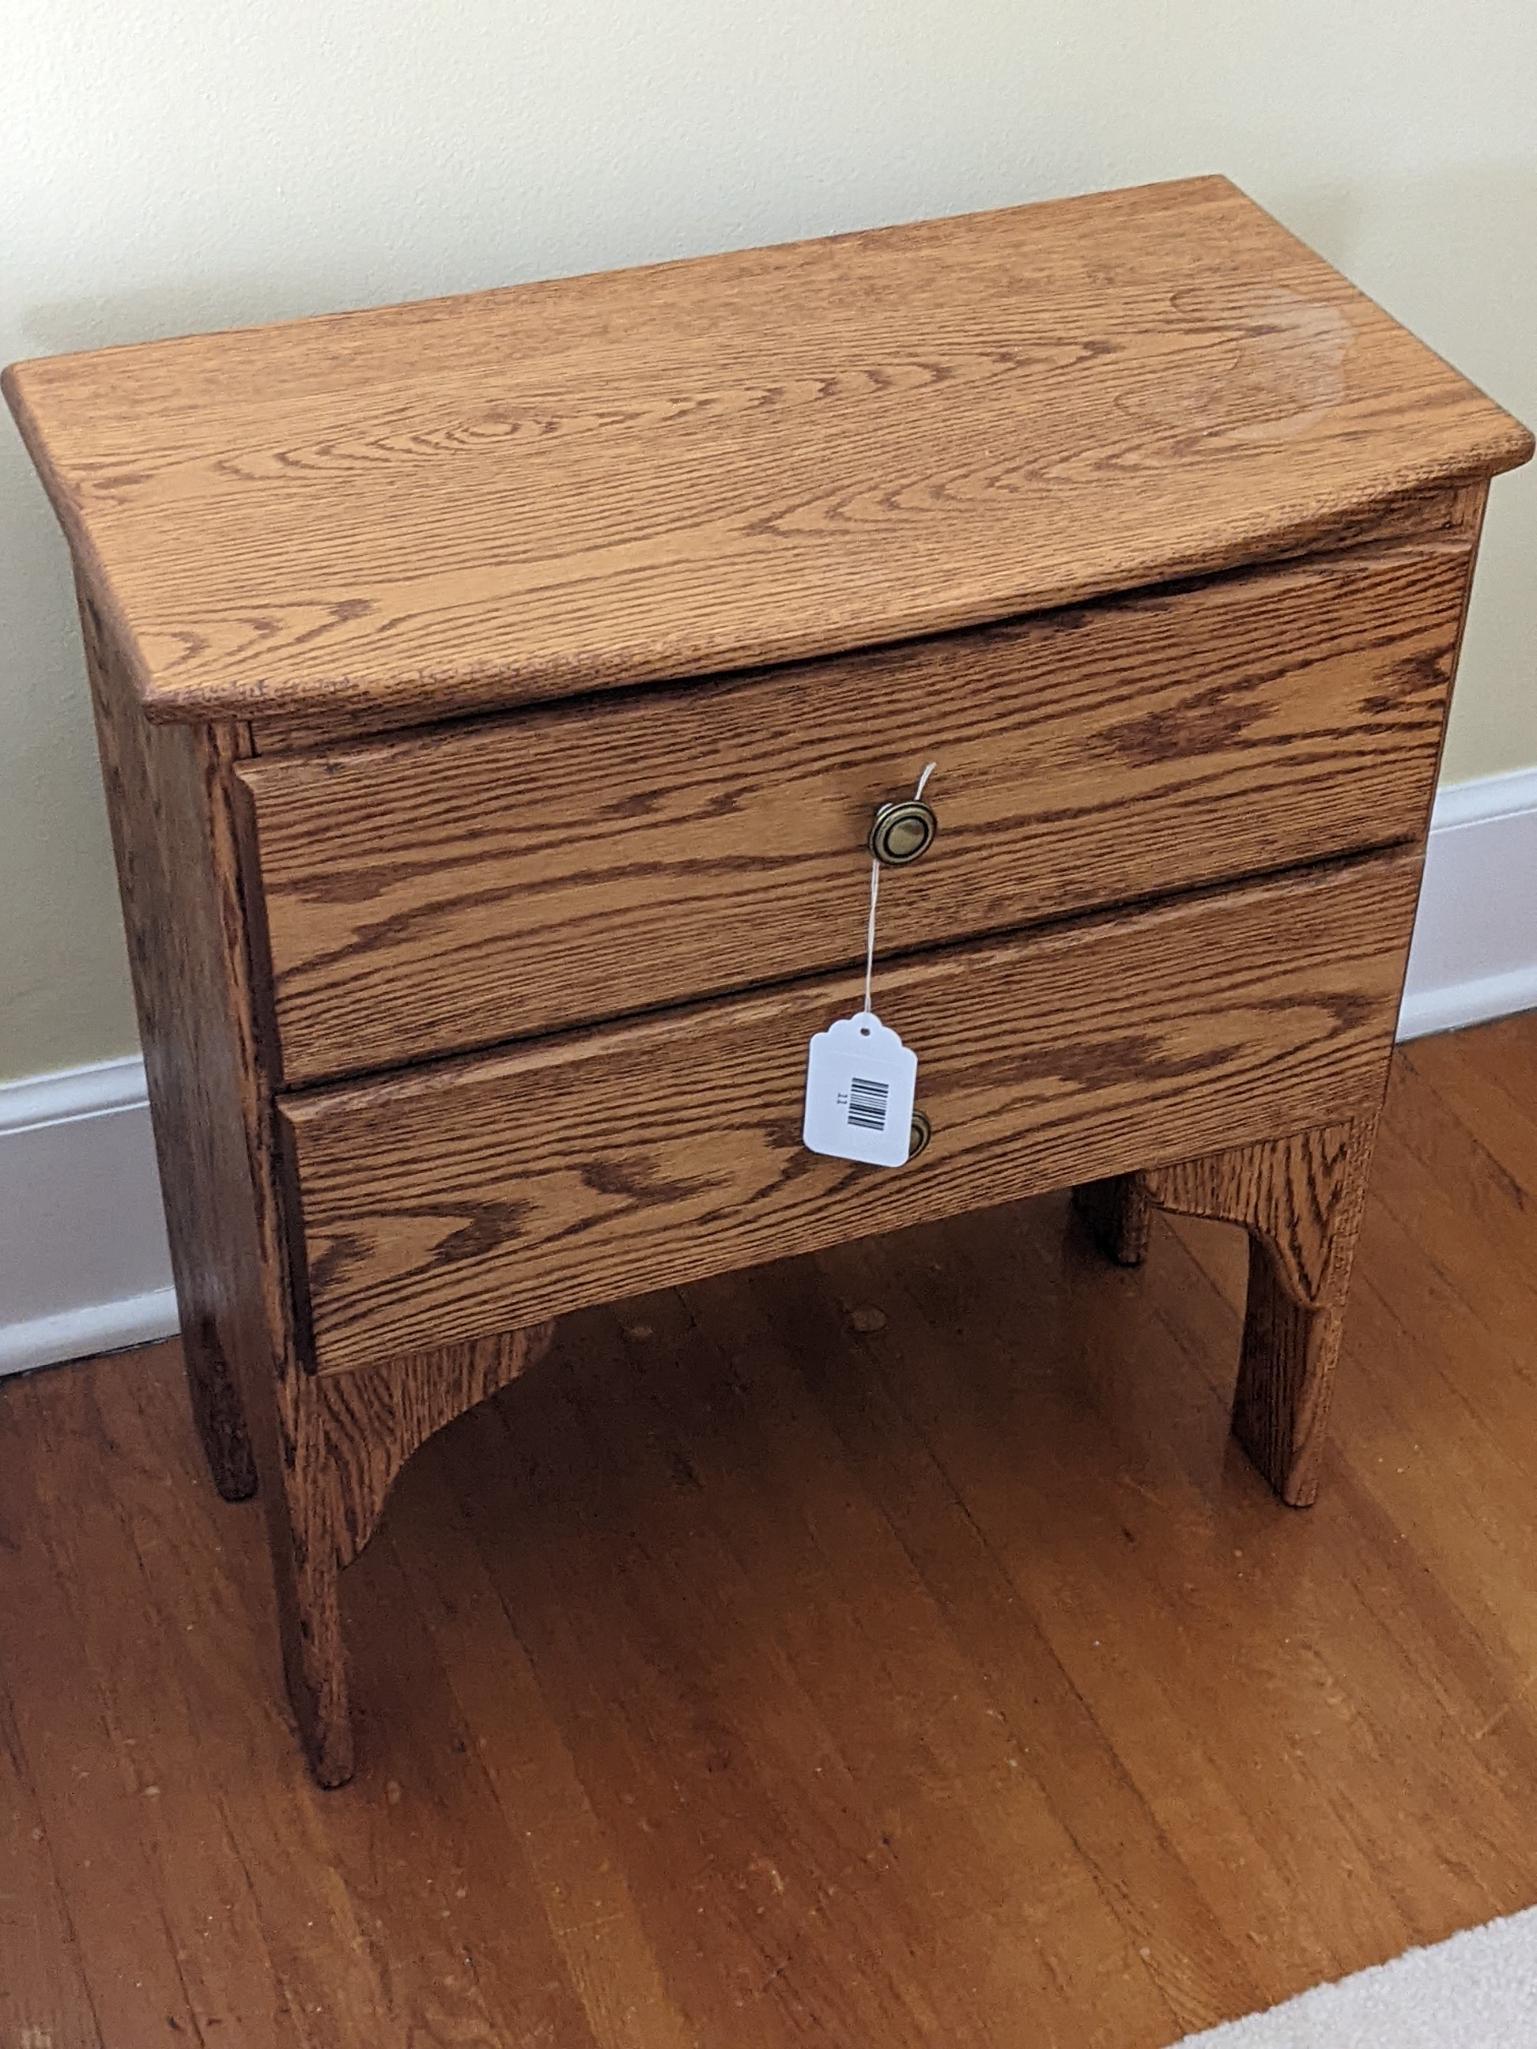 Sweet little nightstand is about 21" x 12" x 23" tall. Faint water mark noted on top, overall good